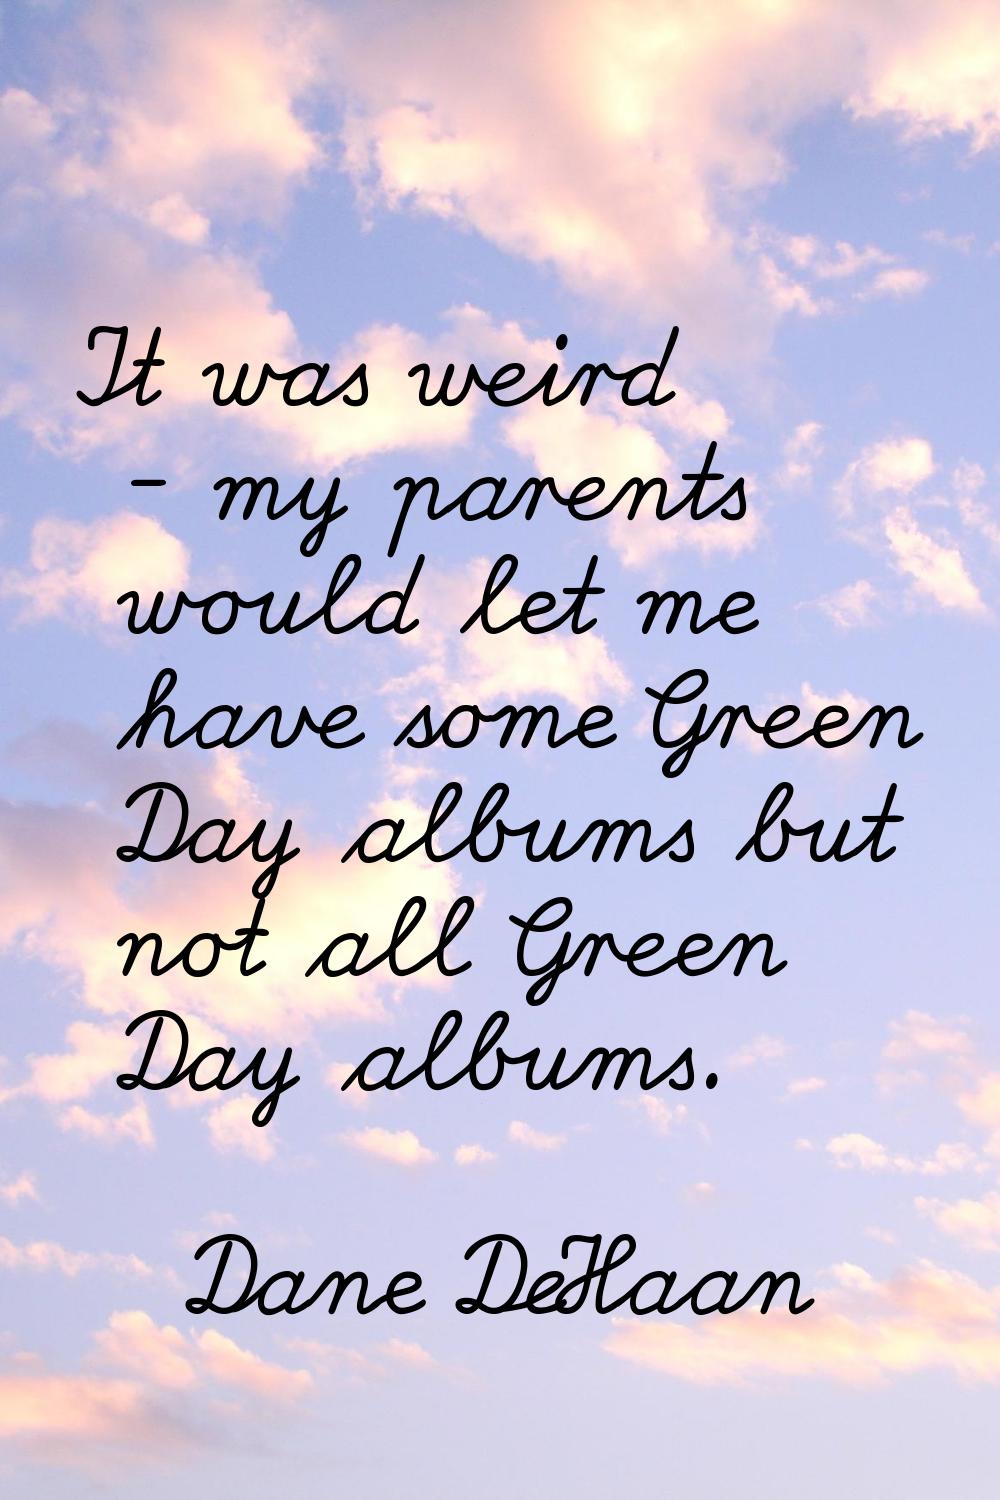 It was weird - my parents would let me have some Green Day albums but not all Green Day albums.